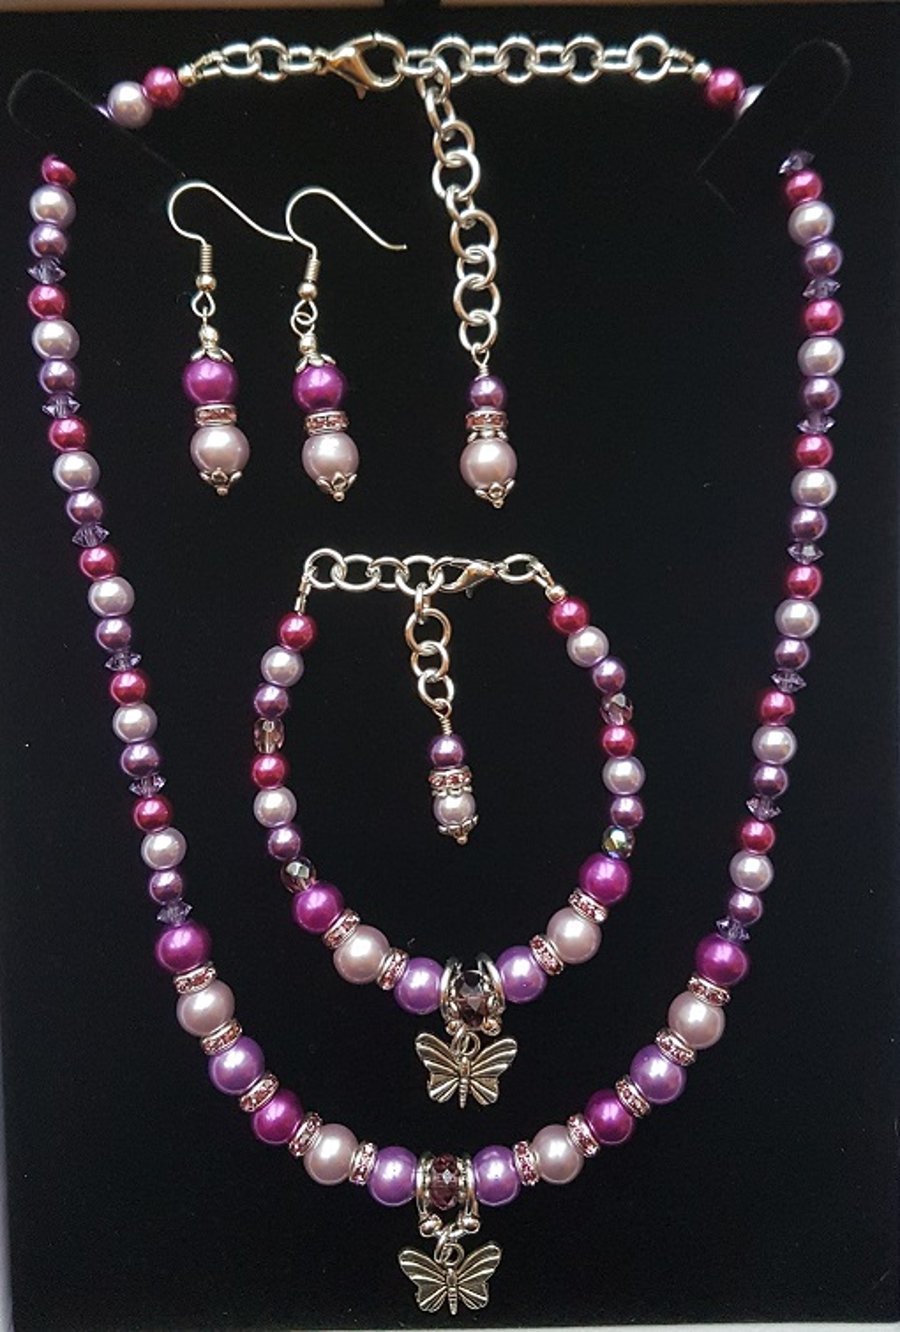 Beautiful Purple and butterflies, Necklace, Bracelet and Earring Set.